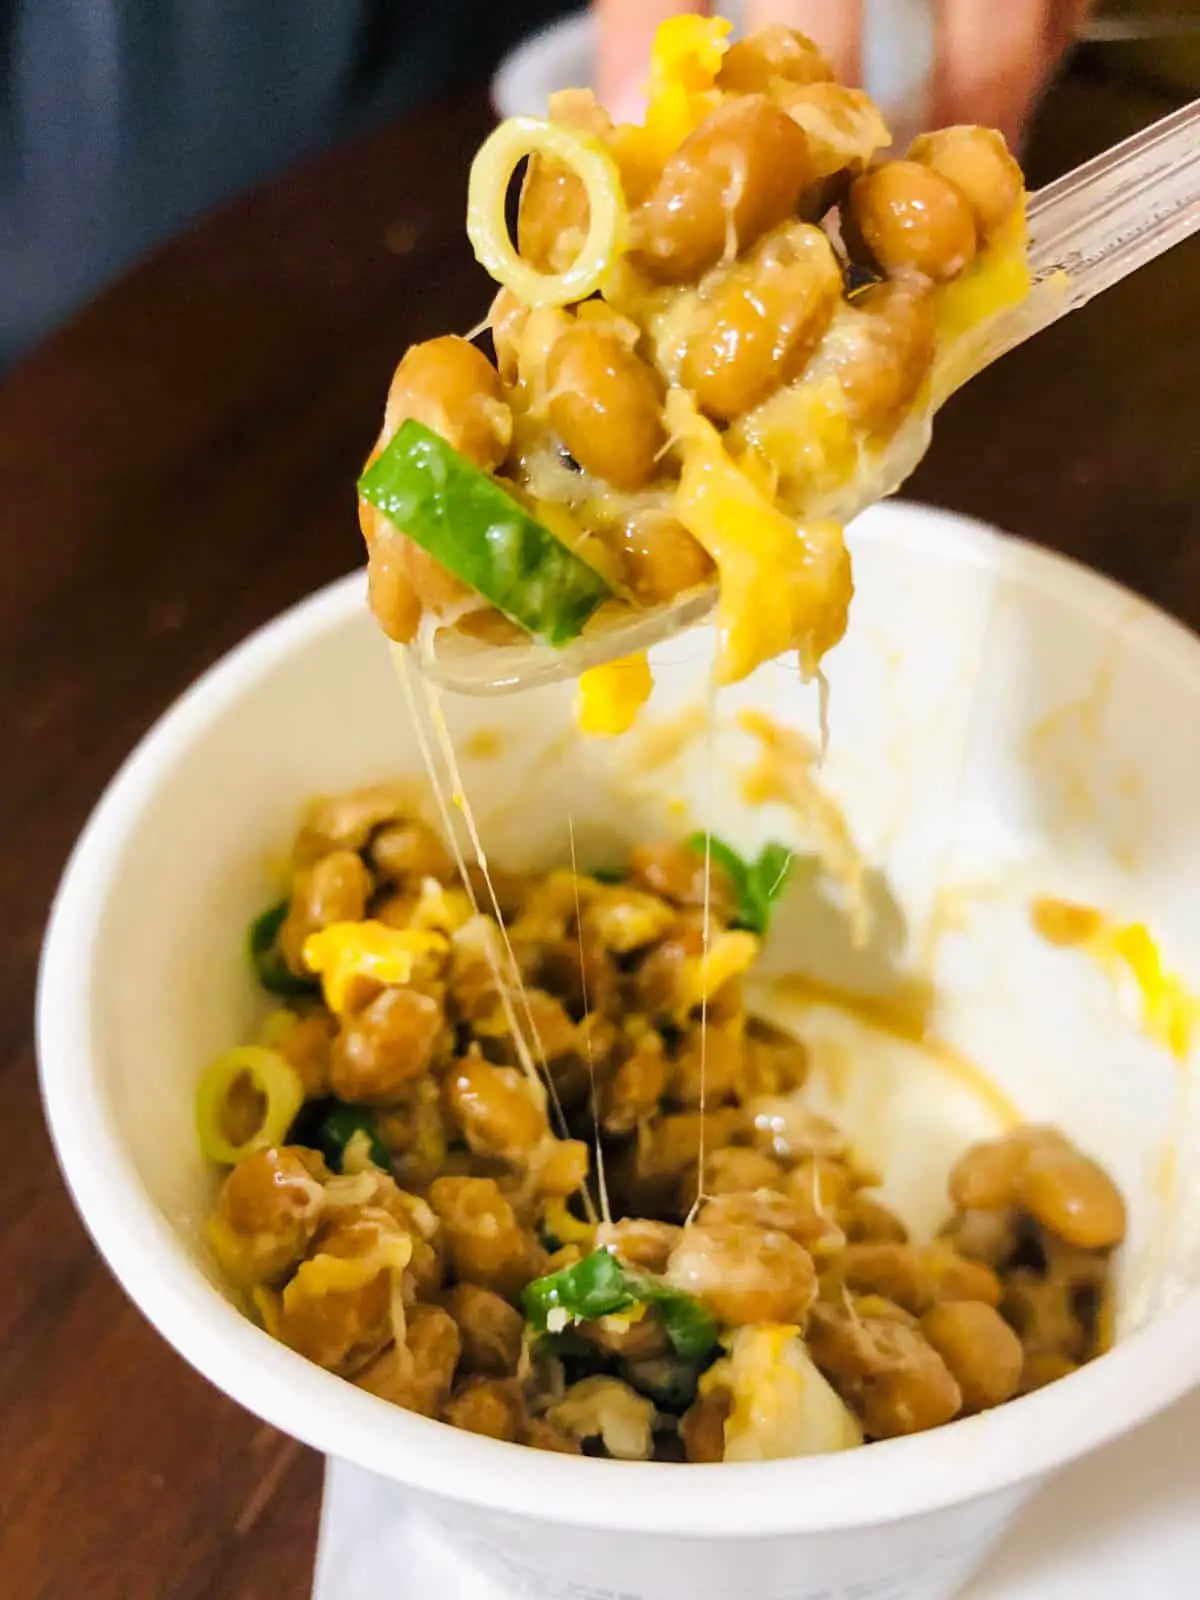 A cardboard cup with natto which is fermented soy beans.  Some natto is on a spoon and there is cooked egg and green onions, and slime. 